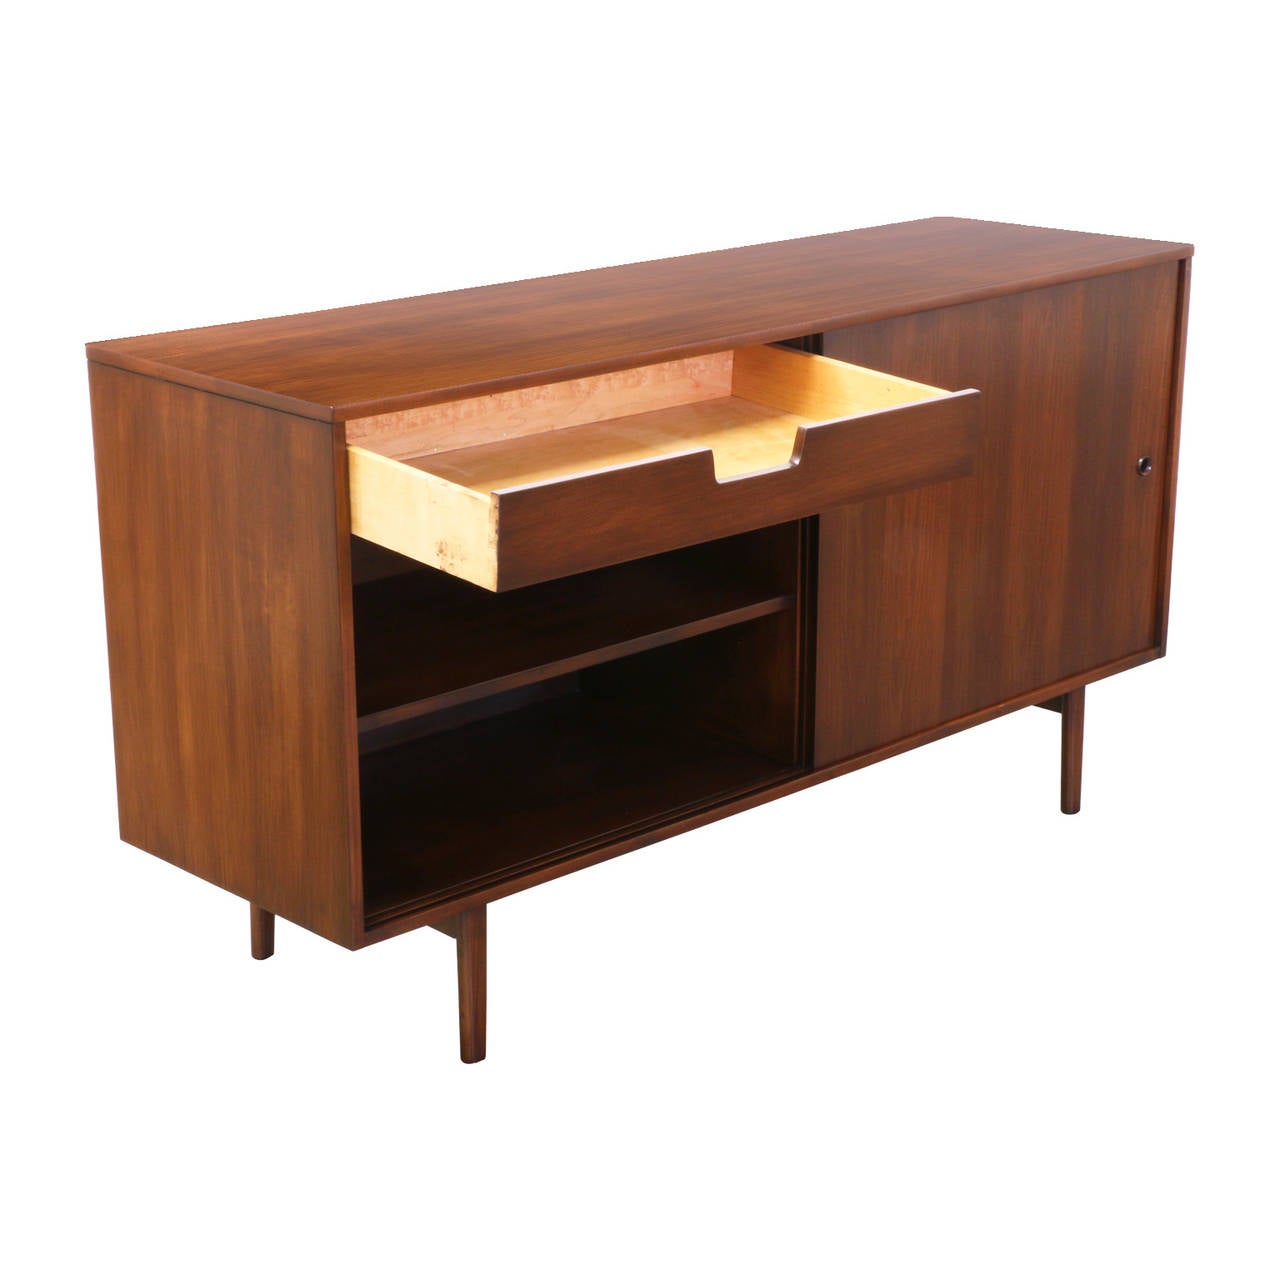 Stained Paul McCobb “Planner Group” Credenza for Winchendon Furniture